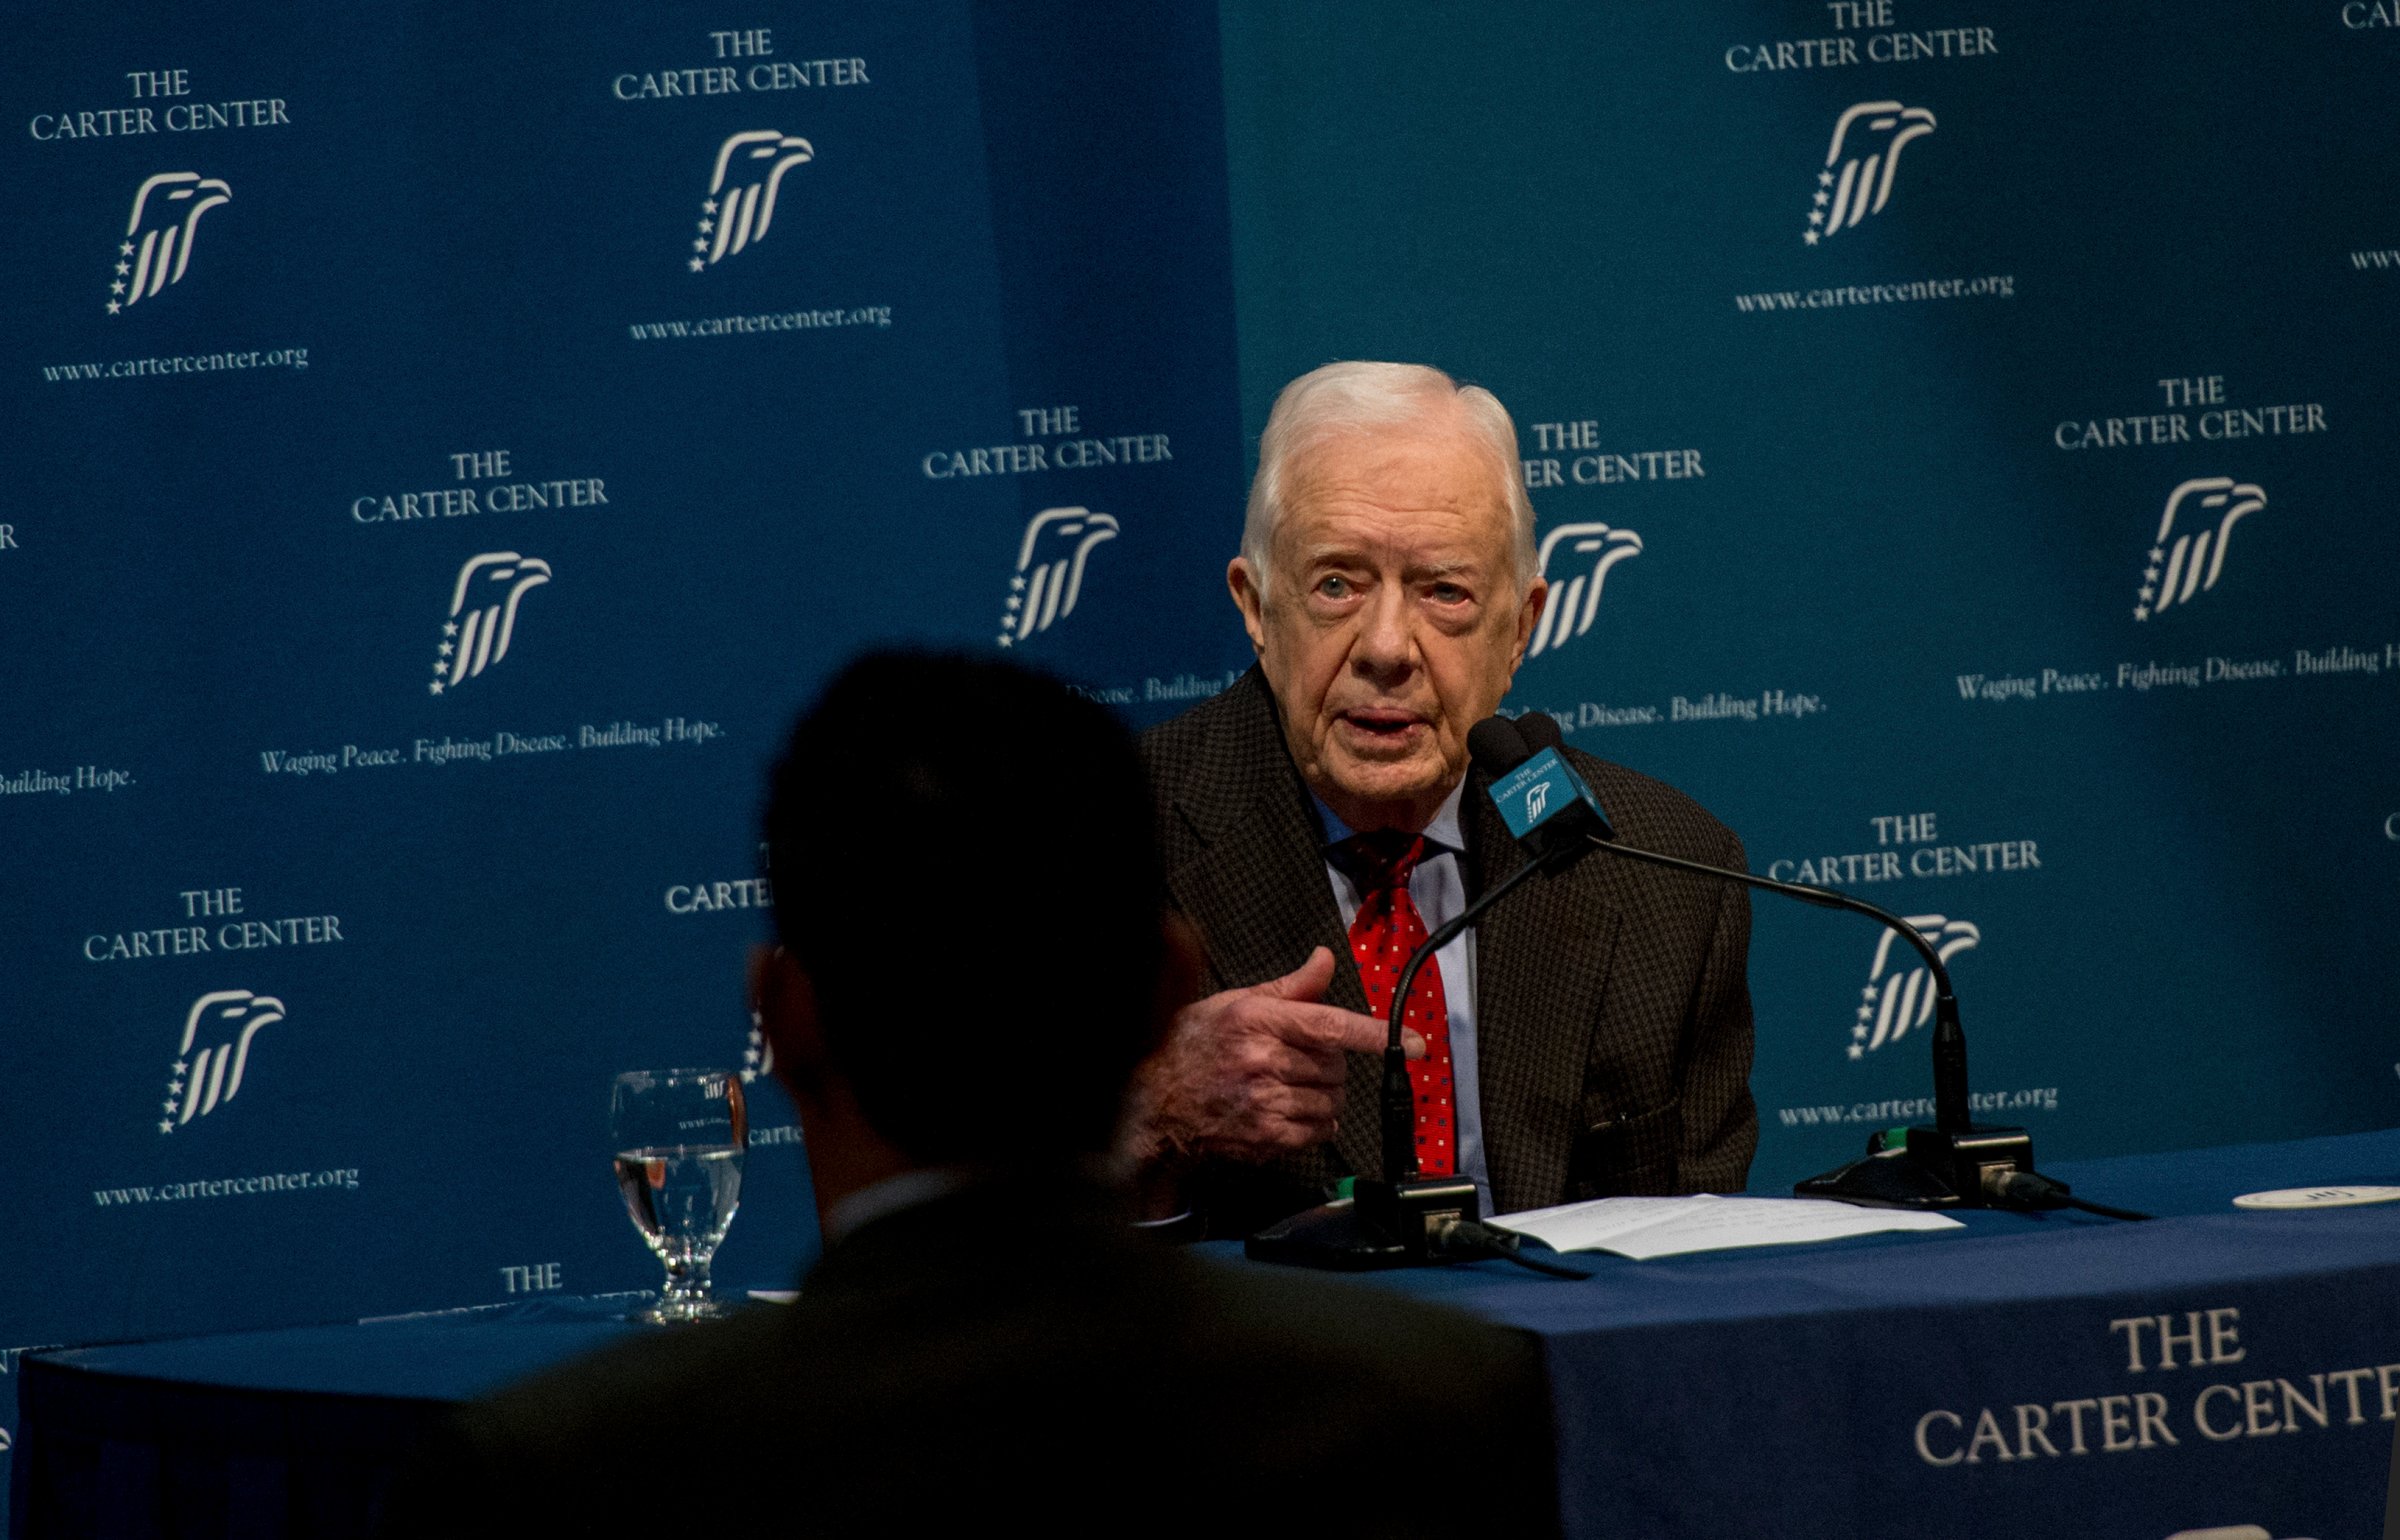 Former U.S. president Jimmy Carter speaks at a news conference at the Carter Center in Atlanta, Georgia, U.S., on Thursday, Aug. 20, 2015. Carter said he has melanoma in his brain, and that he will receive radiation treatment for the cancer beginning Thursday while scaling back work for his philanthropic foundation. Photographer: Chris Rank/Bloomberg *** Local Caption *** Jimmy Carter